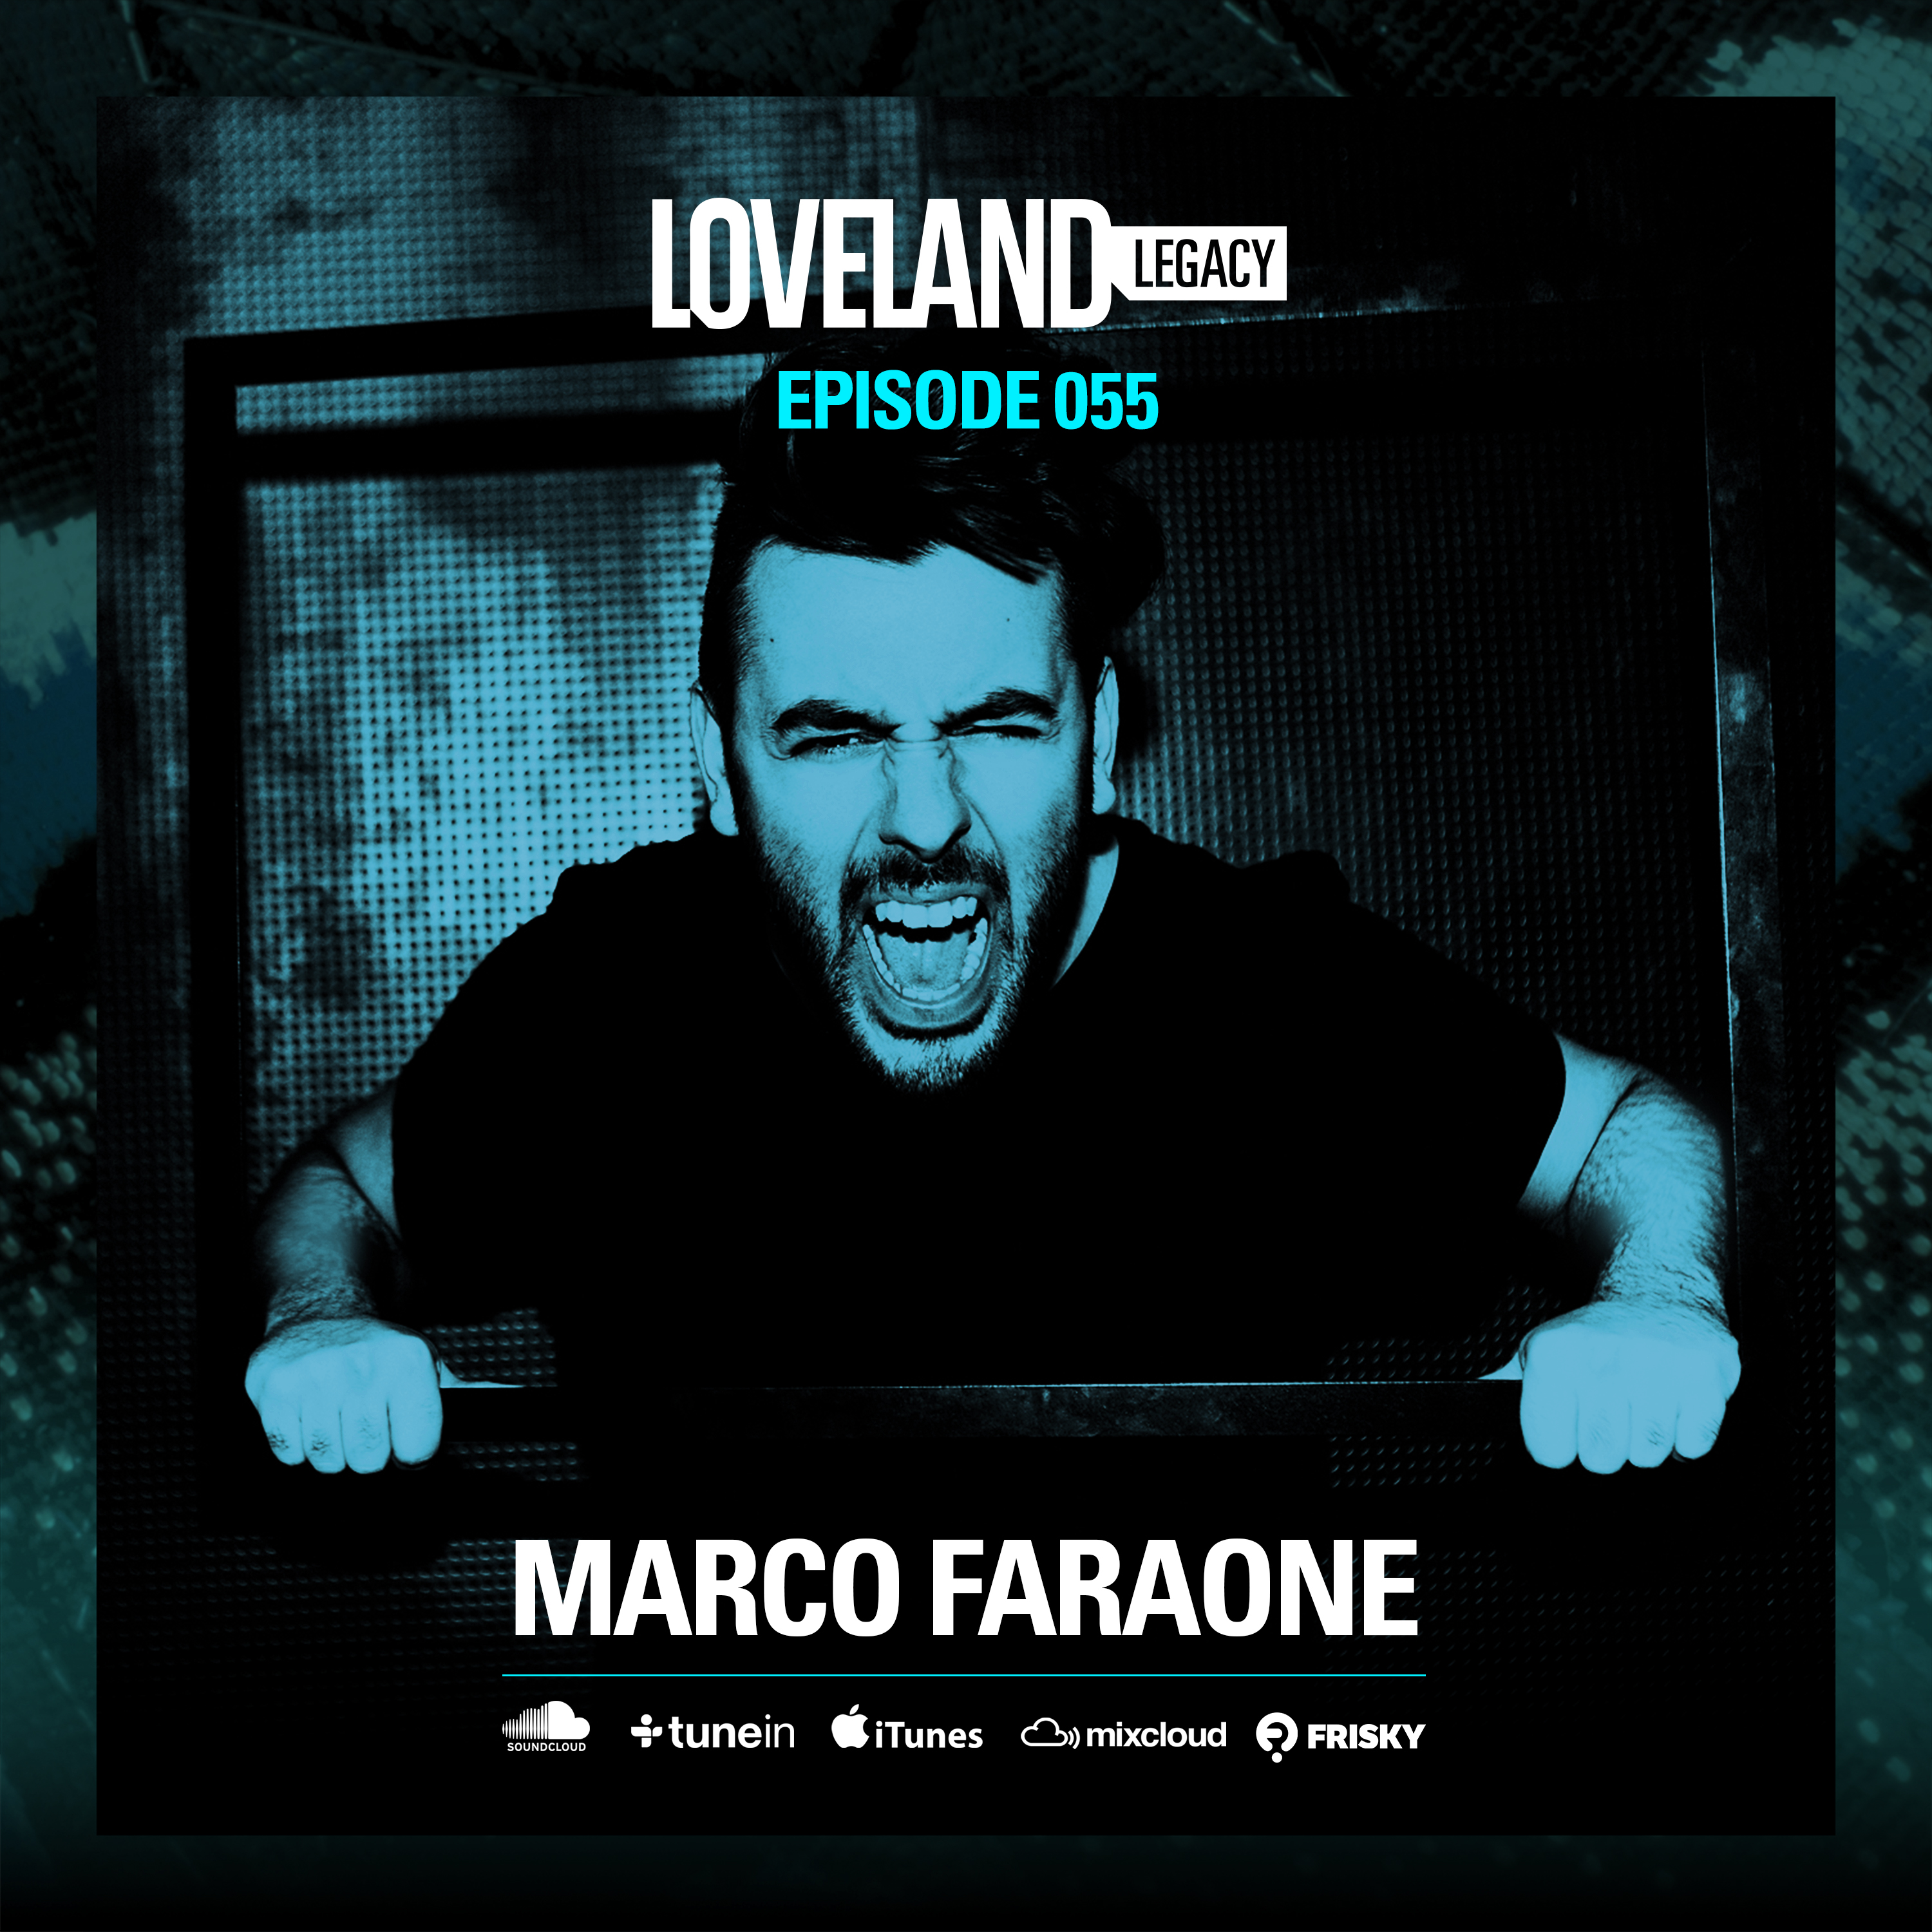 Marco Faraone first steps as a DJ/producer were a residency and release at Alex Neri’s Tenax. Yet, Marco’s ‘big break’ came with a release on Moon Harbour in 2010. Marco Faraone’s production skills are stressed by releases on quality imprints like Drumcode, Desolat, Sci+Tec, Get Physical and Truesoul. Enjoy this great set of the Italian maestro at Drumcode at Loveland Barcelona 2016 in episode 55 of Loveland Legacy!